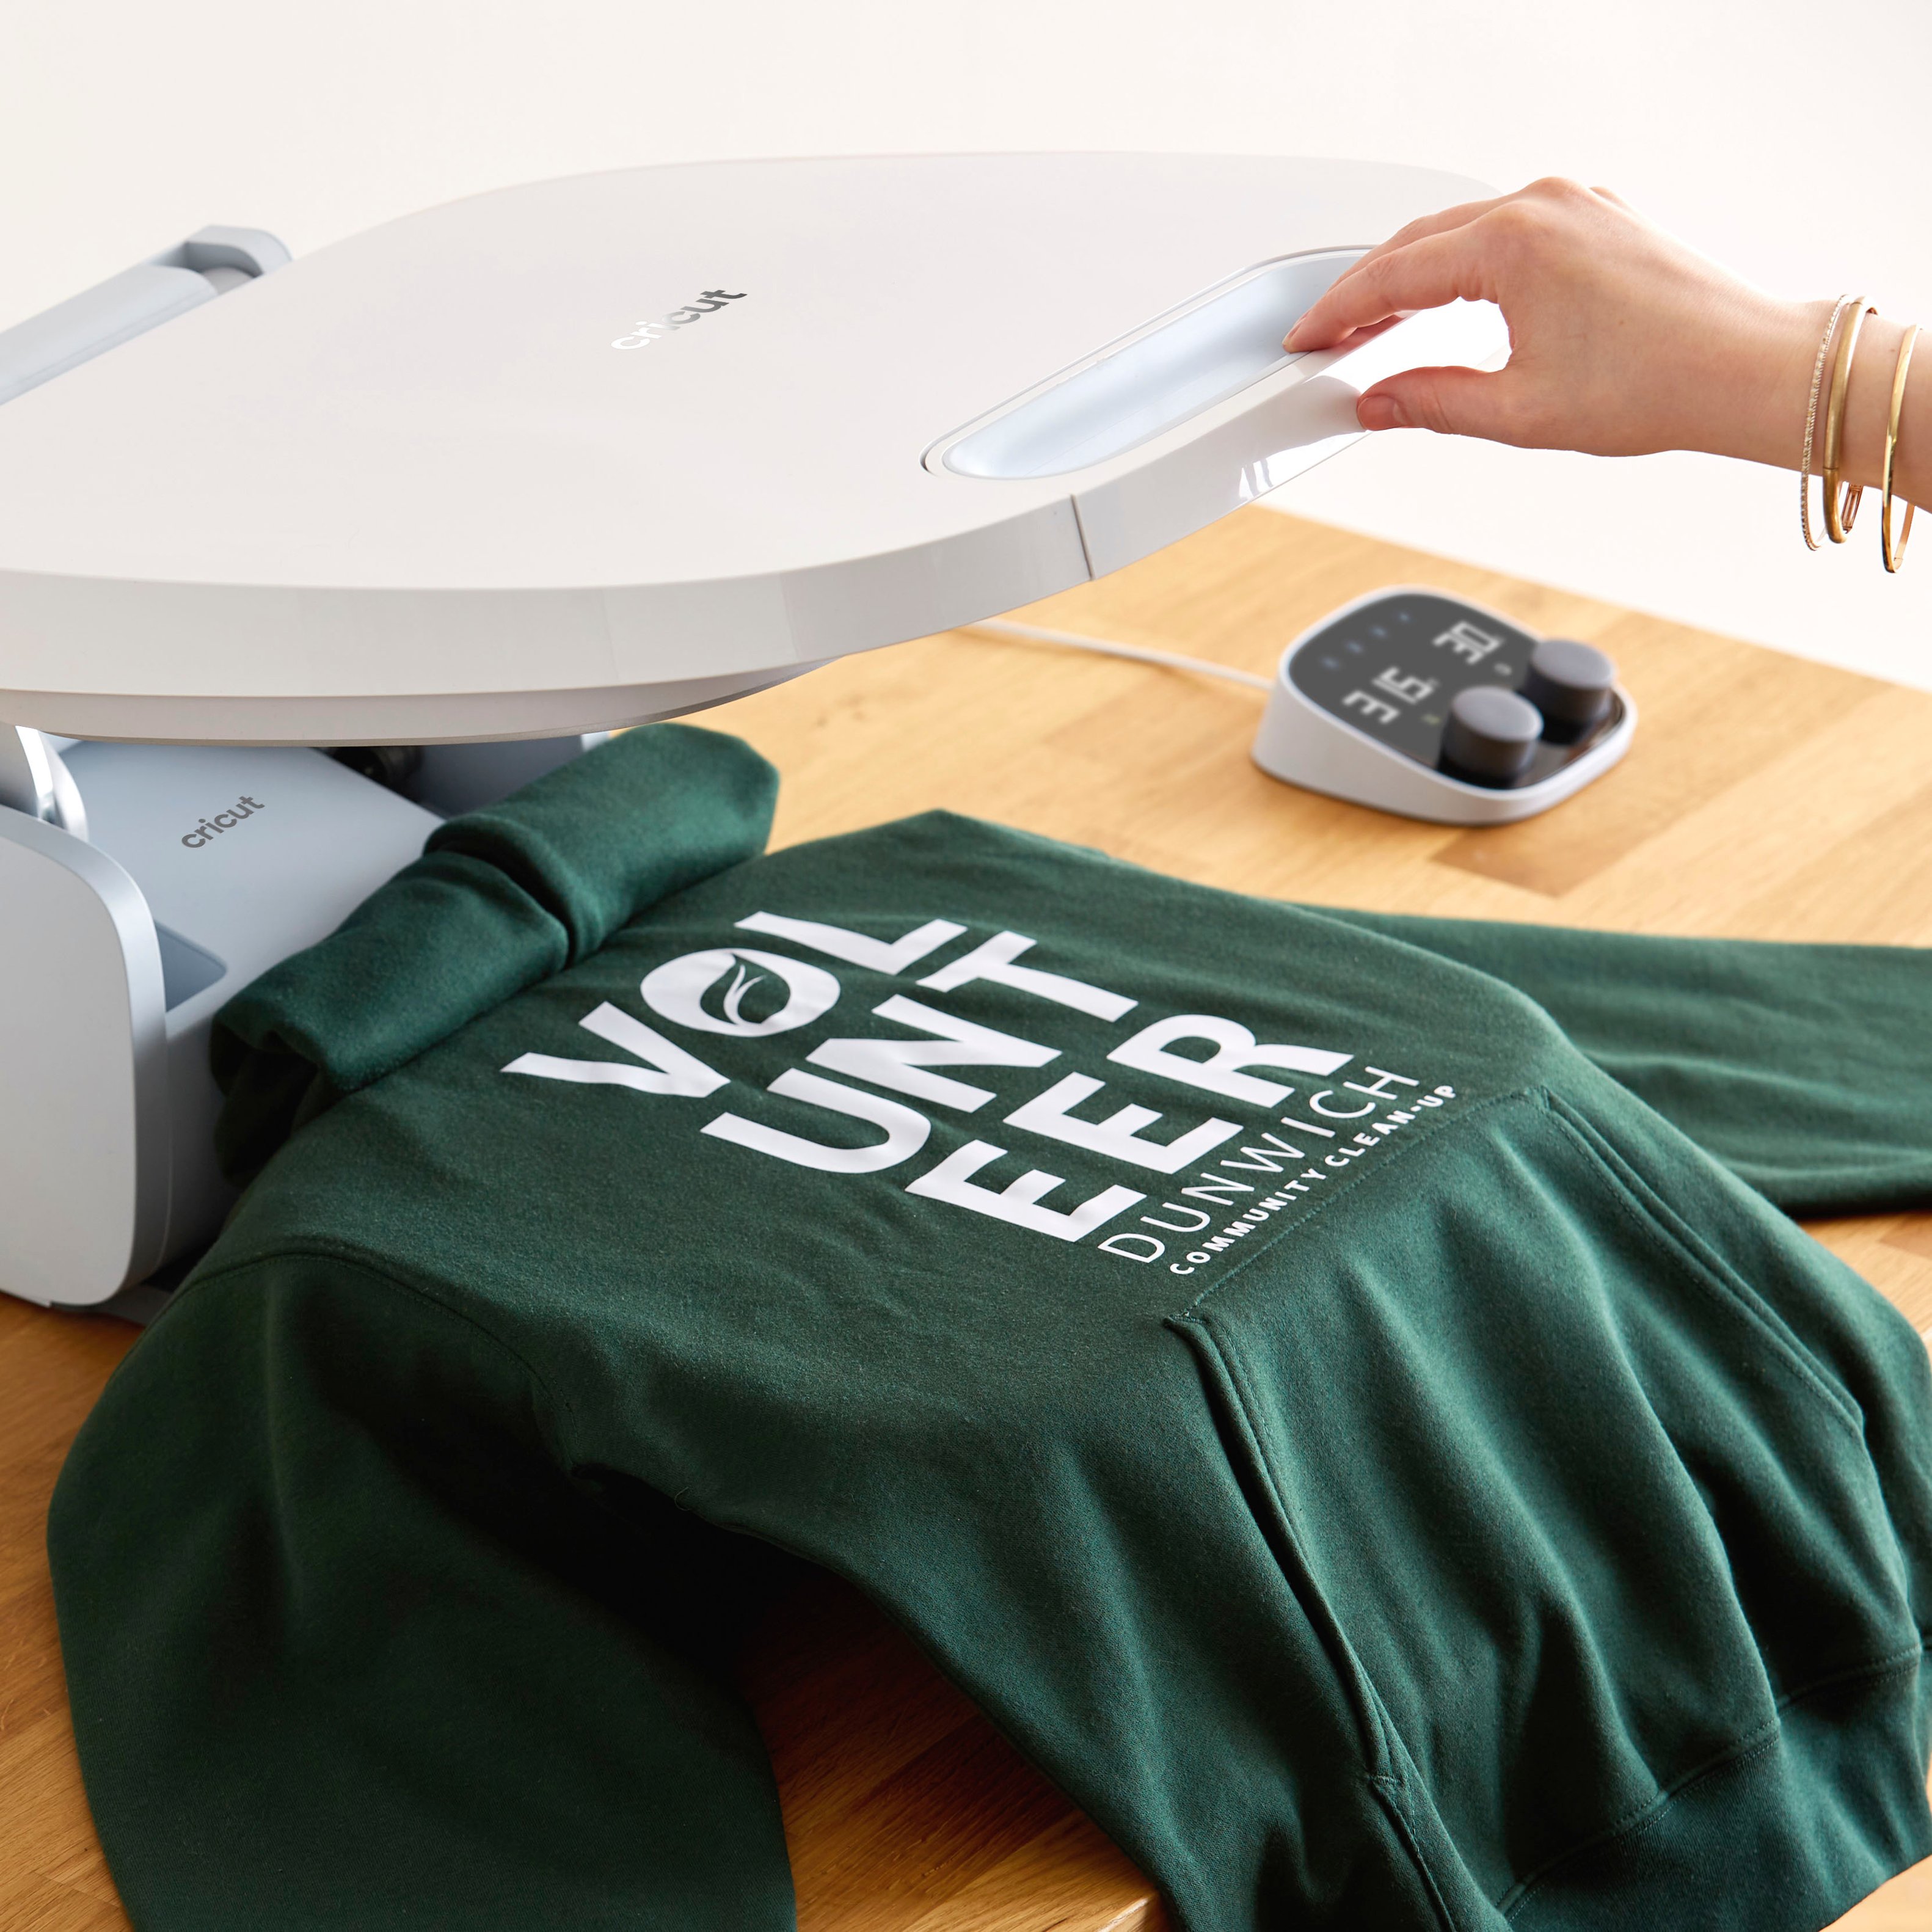 Cricut Autopress Review: A Clever Heat Press in an Expensive Box